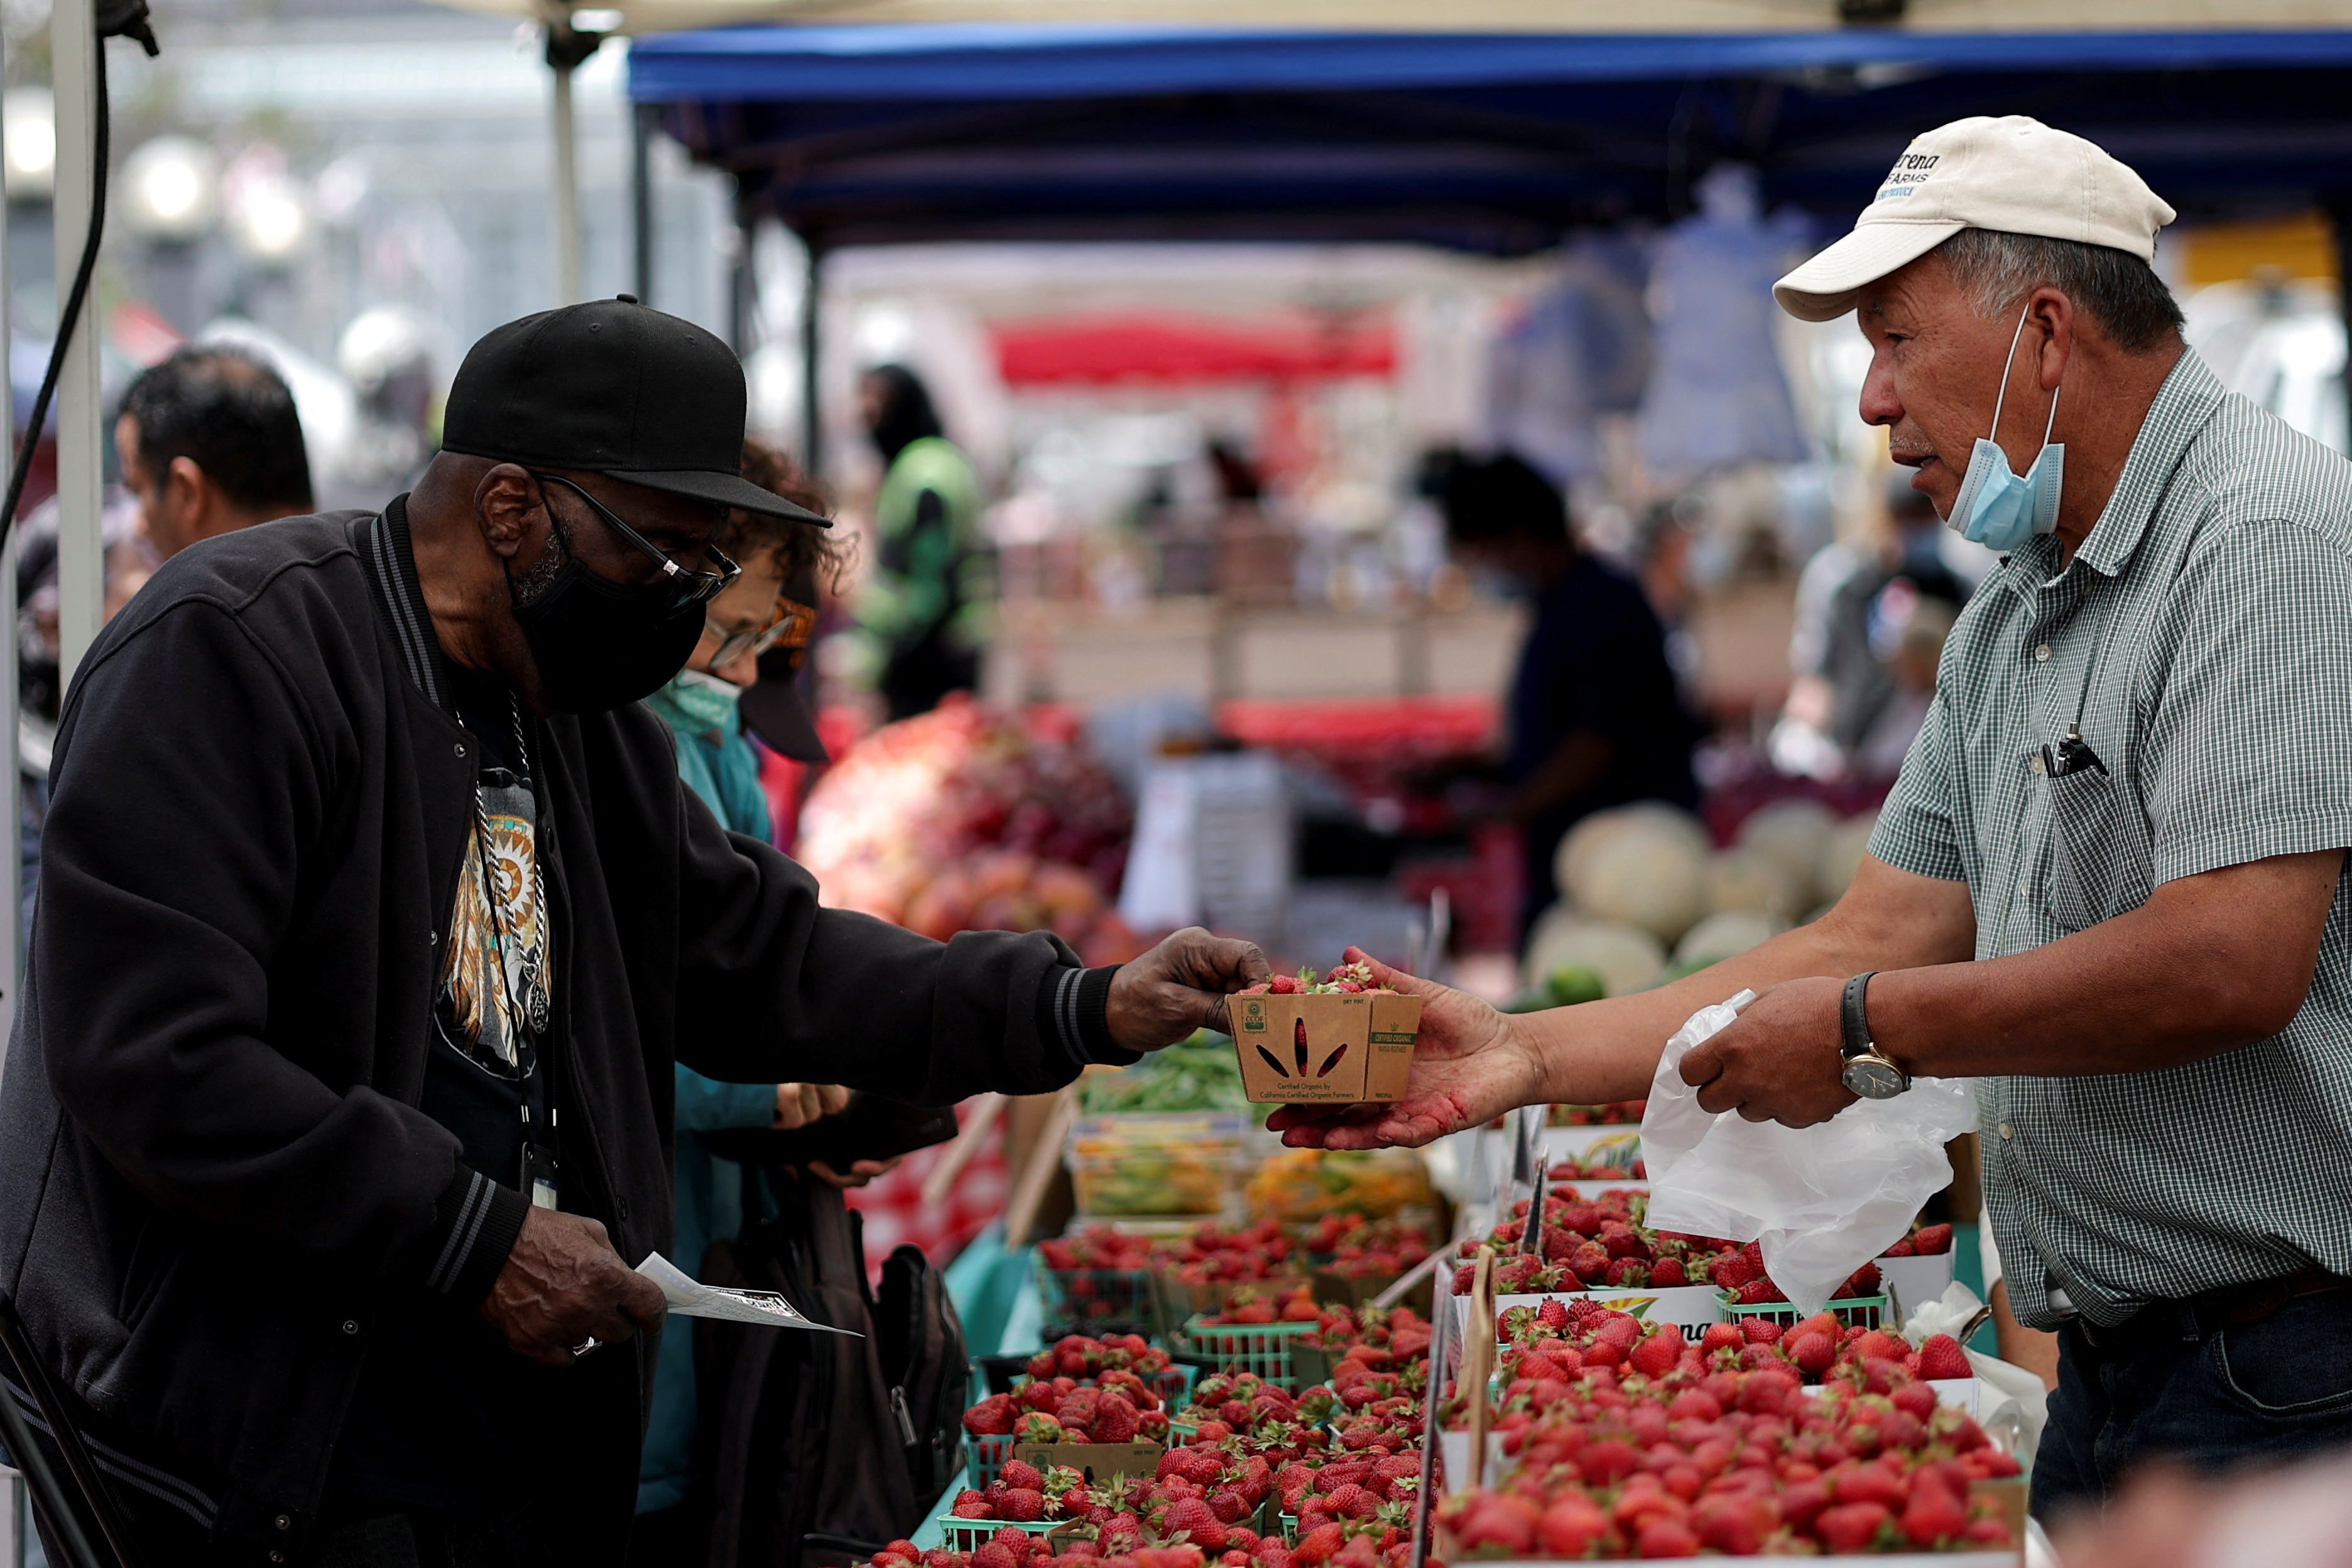 A resident buys strawberries at a local market in downtown San Francisco, California